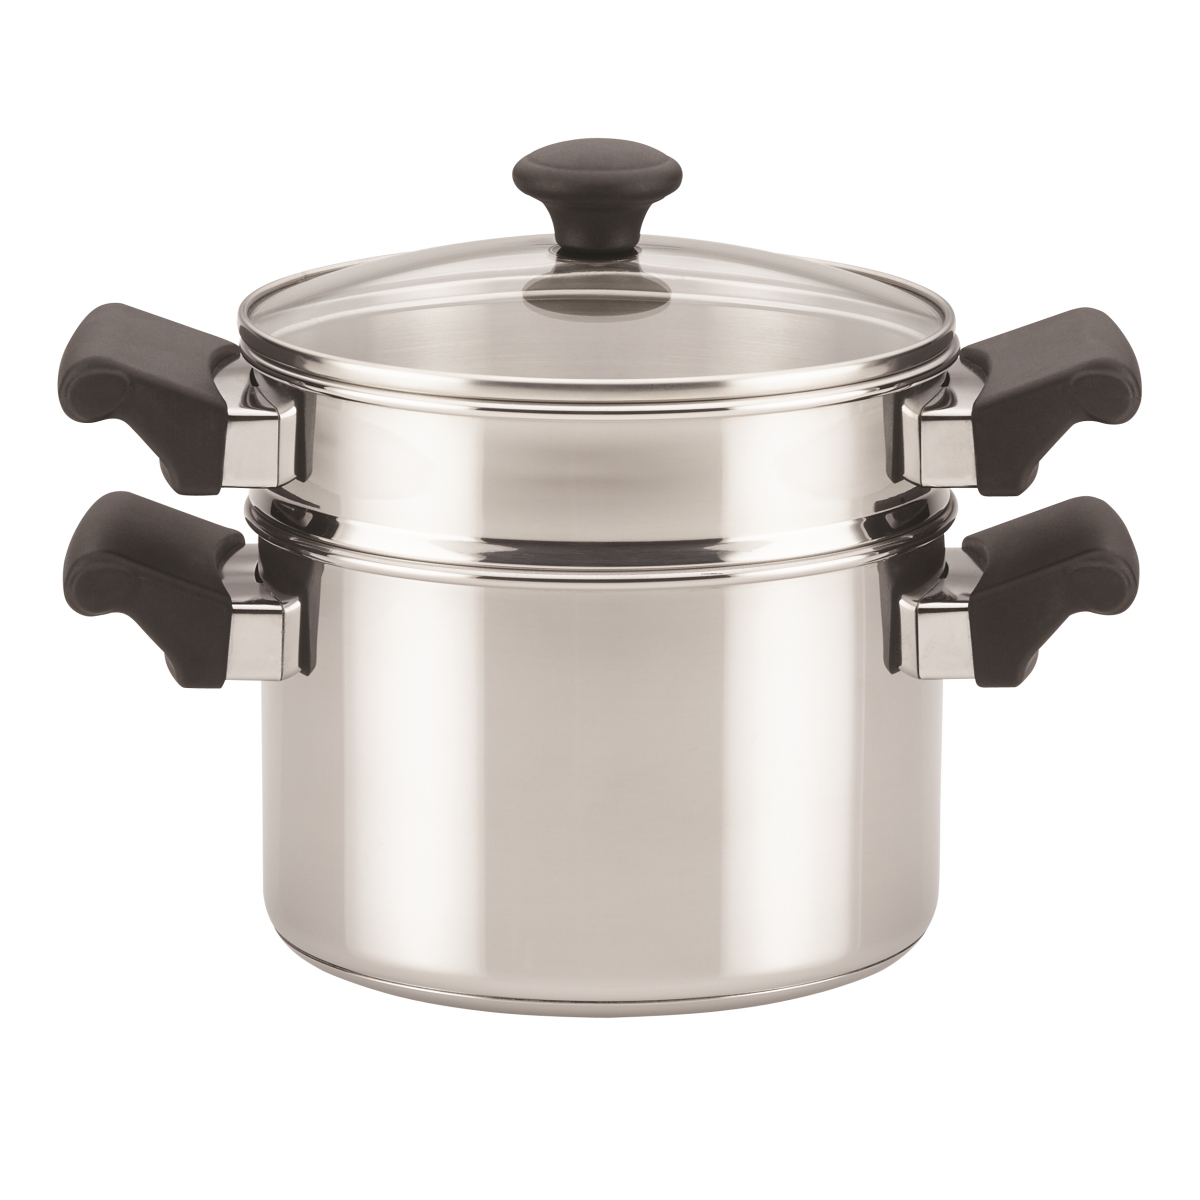 Picture of Farberware 70219 Classic Traditions Stainless Steel Stack N Steam Covered Saucepot & Steamer - 3 qt